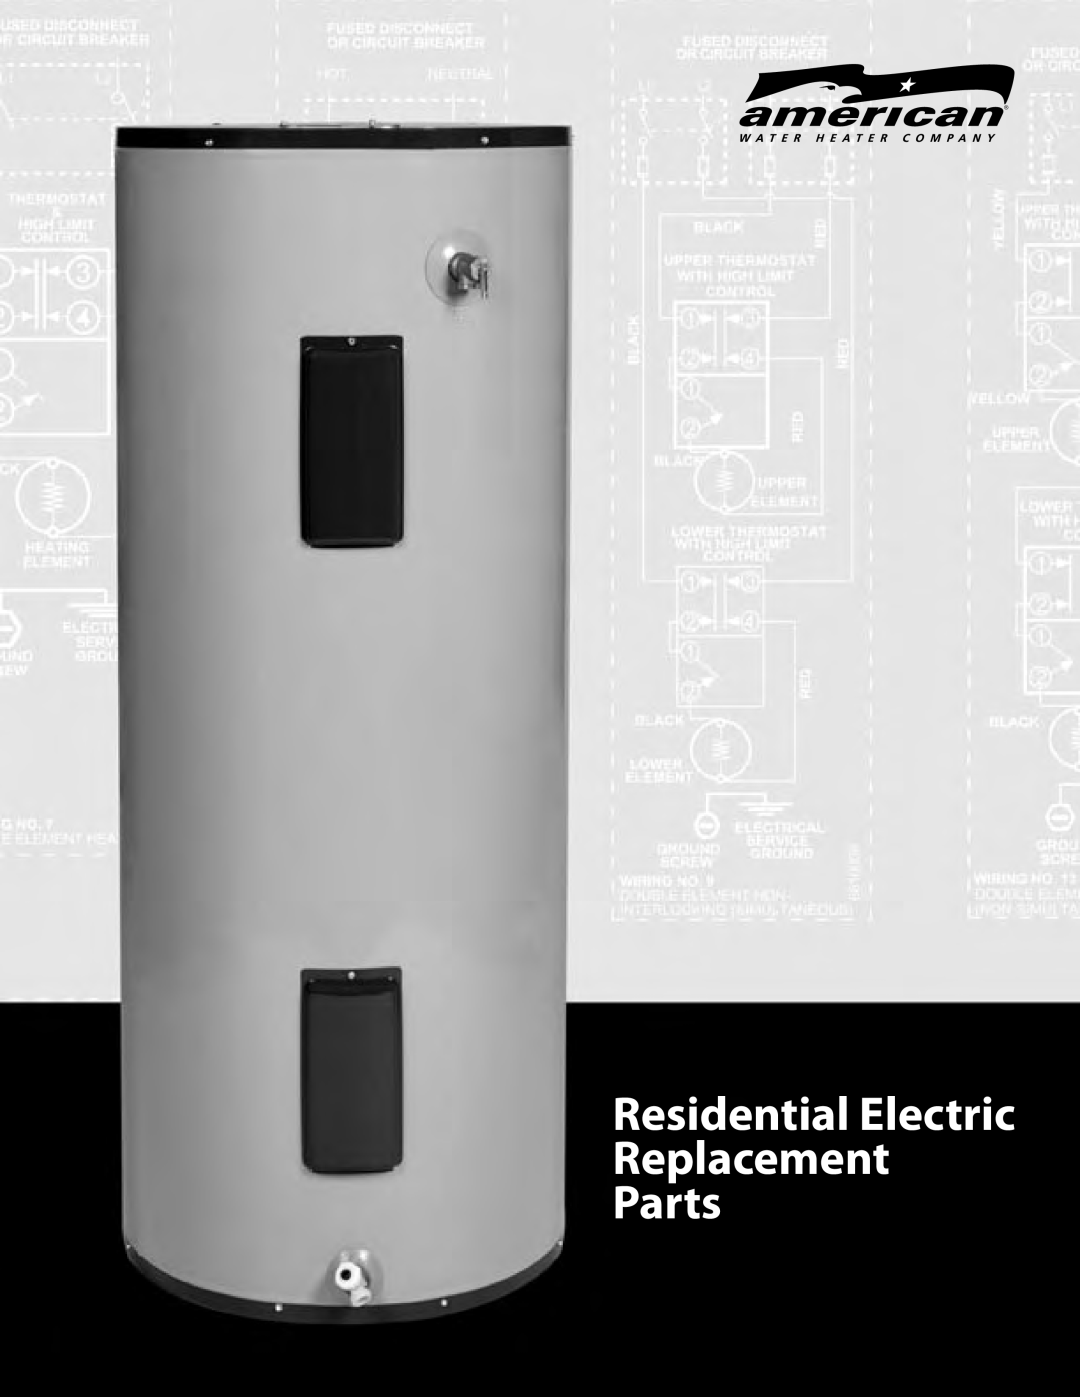 American Water Heater E6x-80H, E6x-65H, E9, E6x-119R, E6x-30H, E6x-40R, E6x-50R manual Residential Electric Replacement Parts 